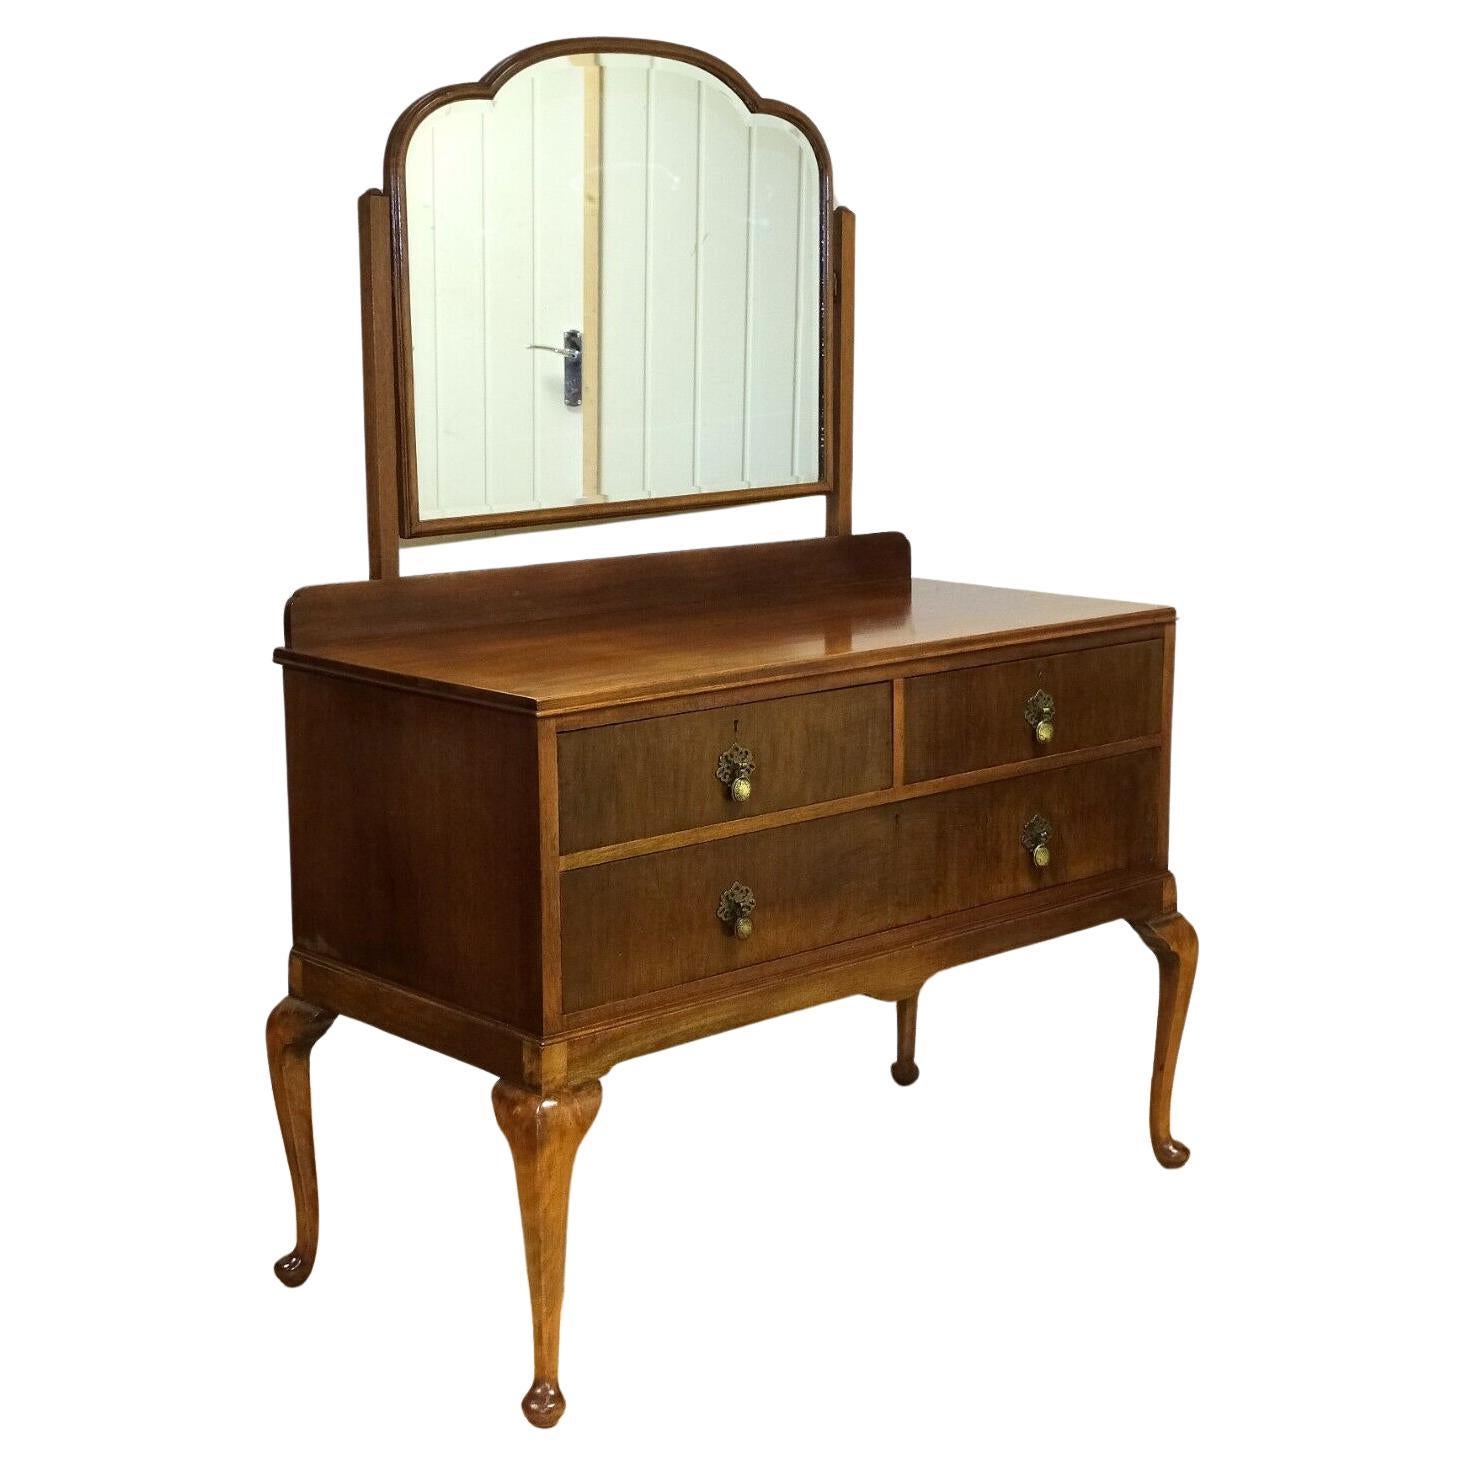 We are delighted to offer for sale this lovely early 20th-century Mahogany dressing table on cabriole legs and drawers.

This well made and beautiful dressing table is presented with an original bevelled mirror, which is able to move upwards or